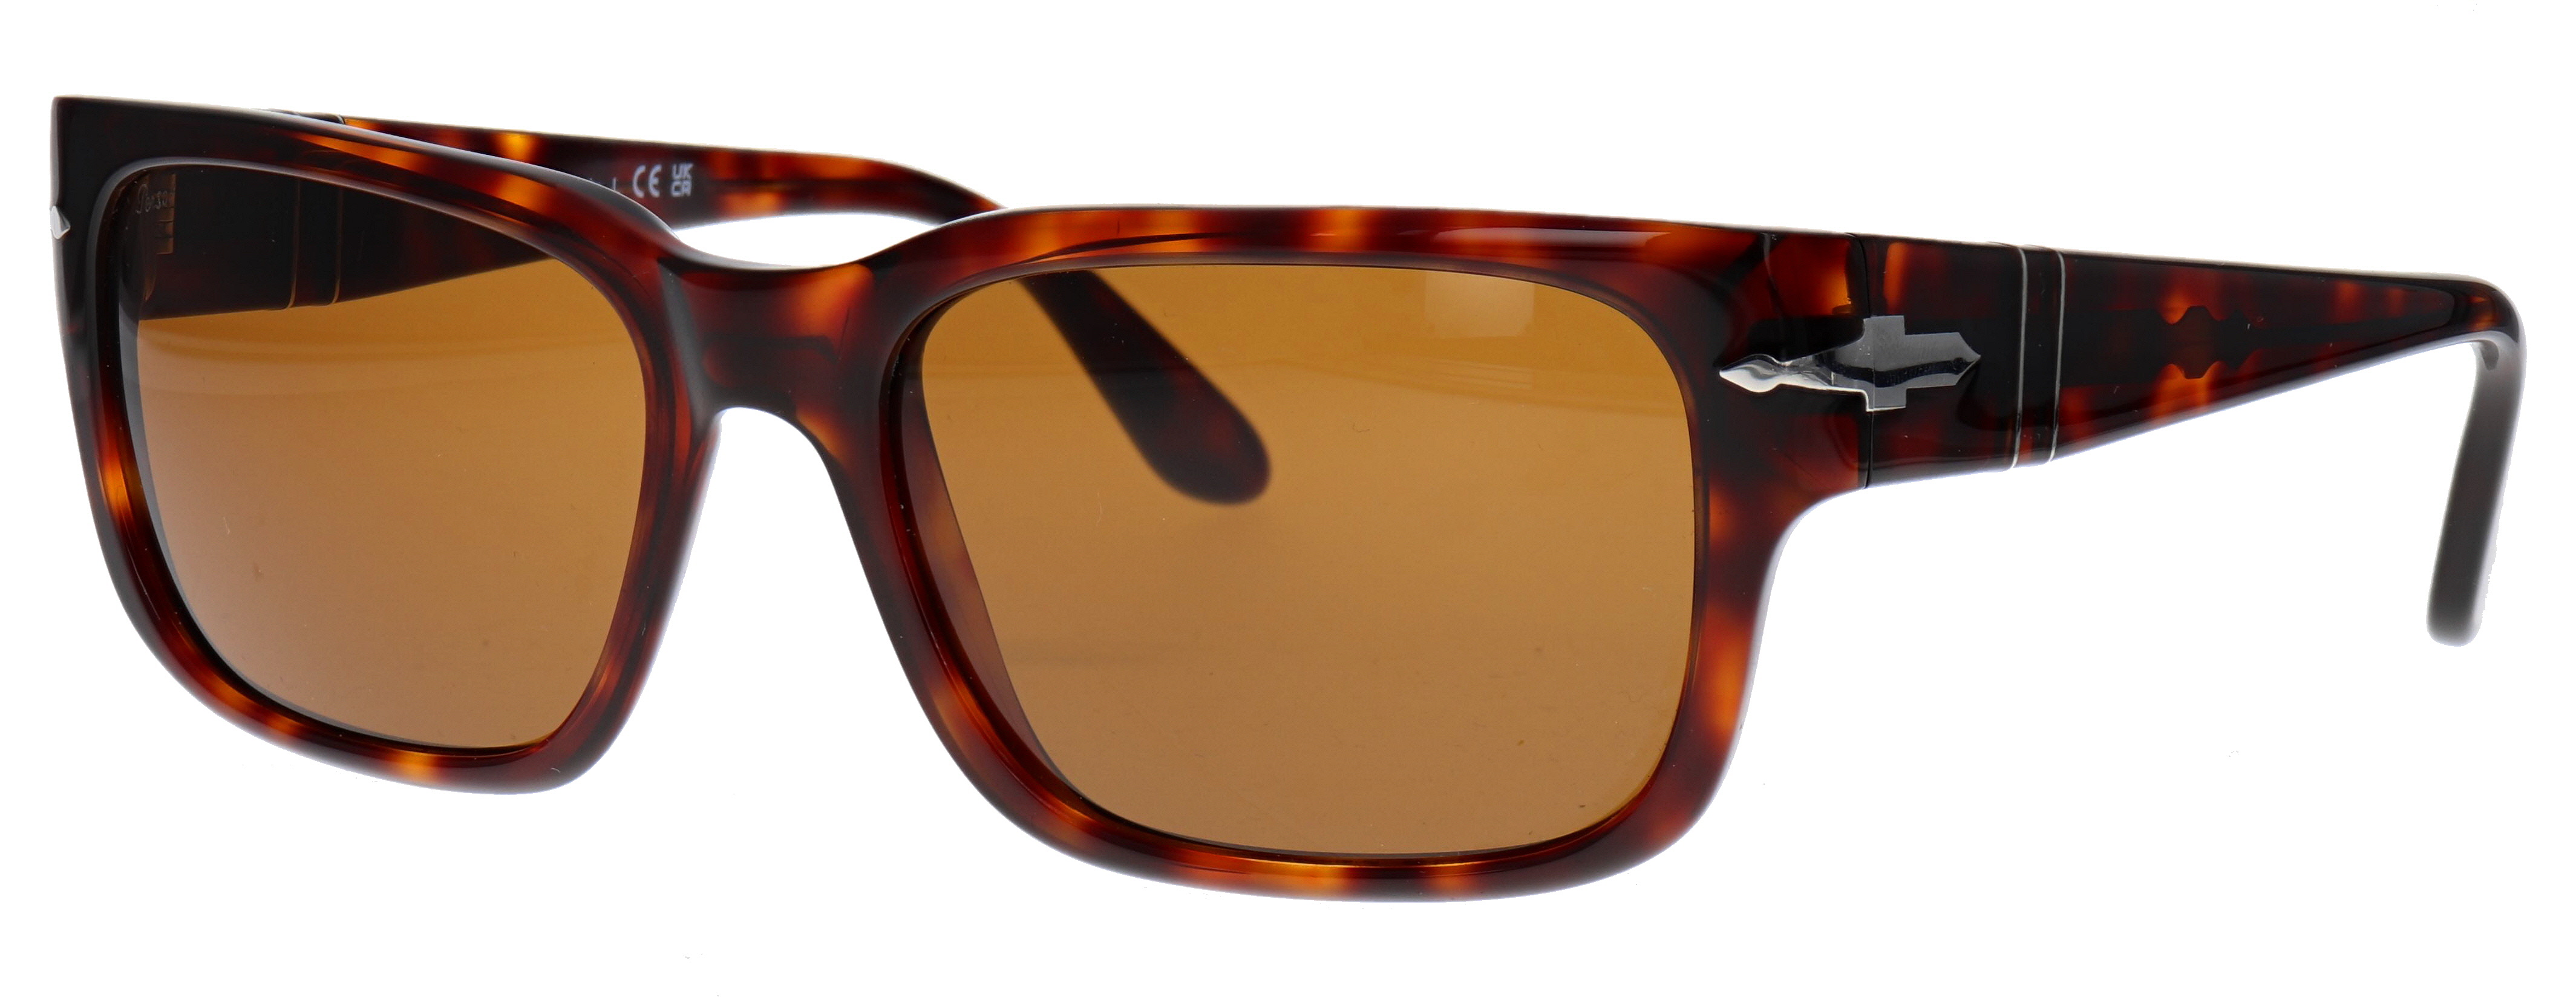 Persol 3315-S